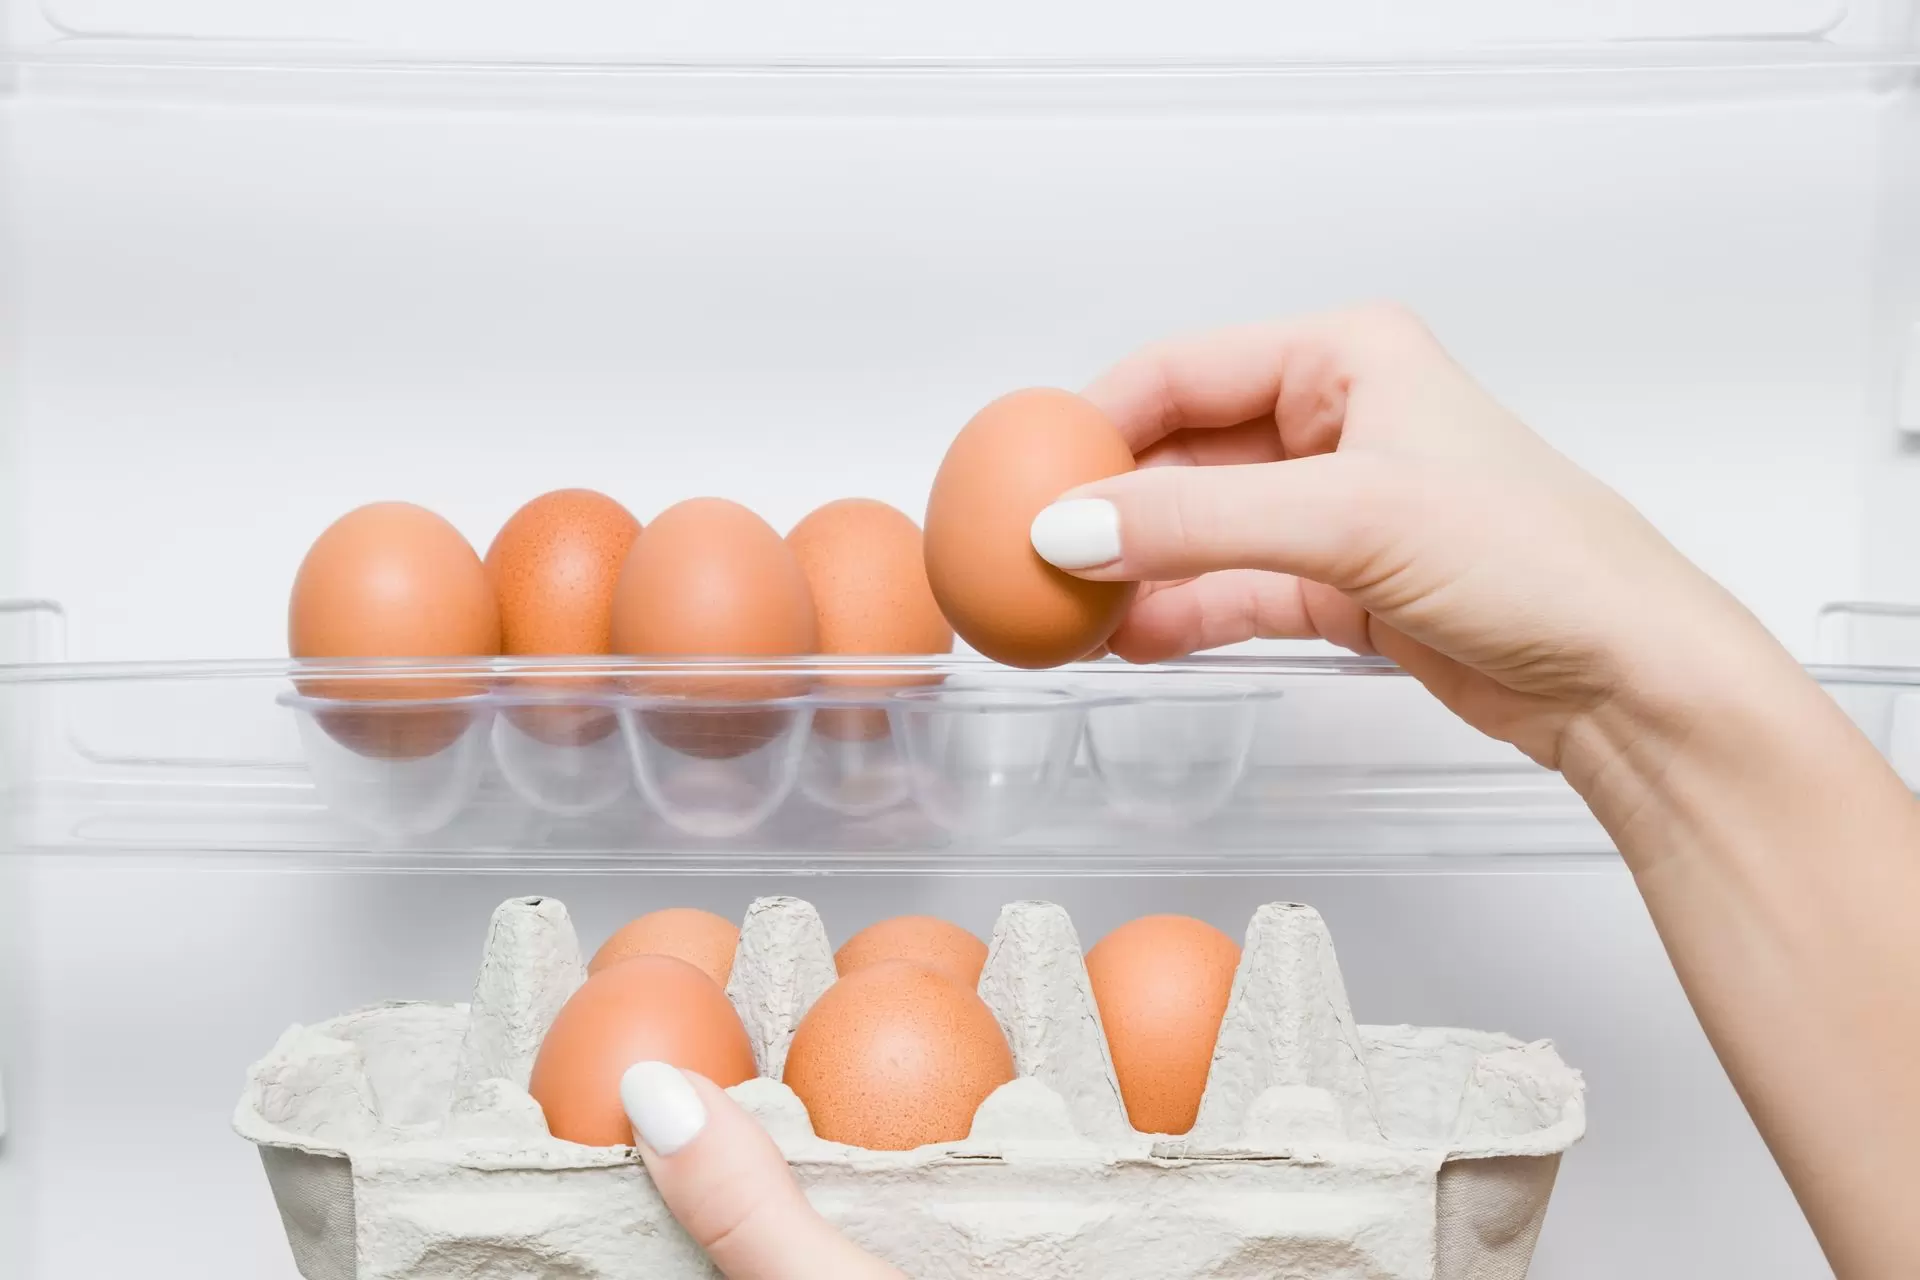 How To Store Eggs Properly